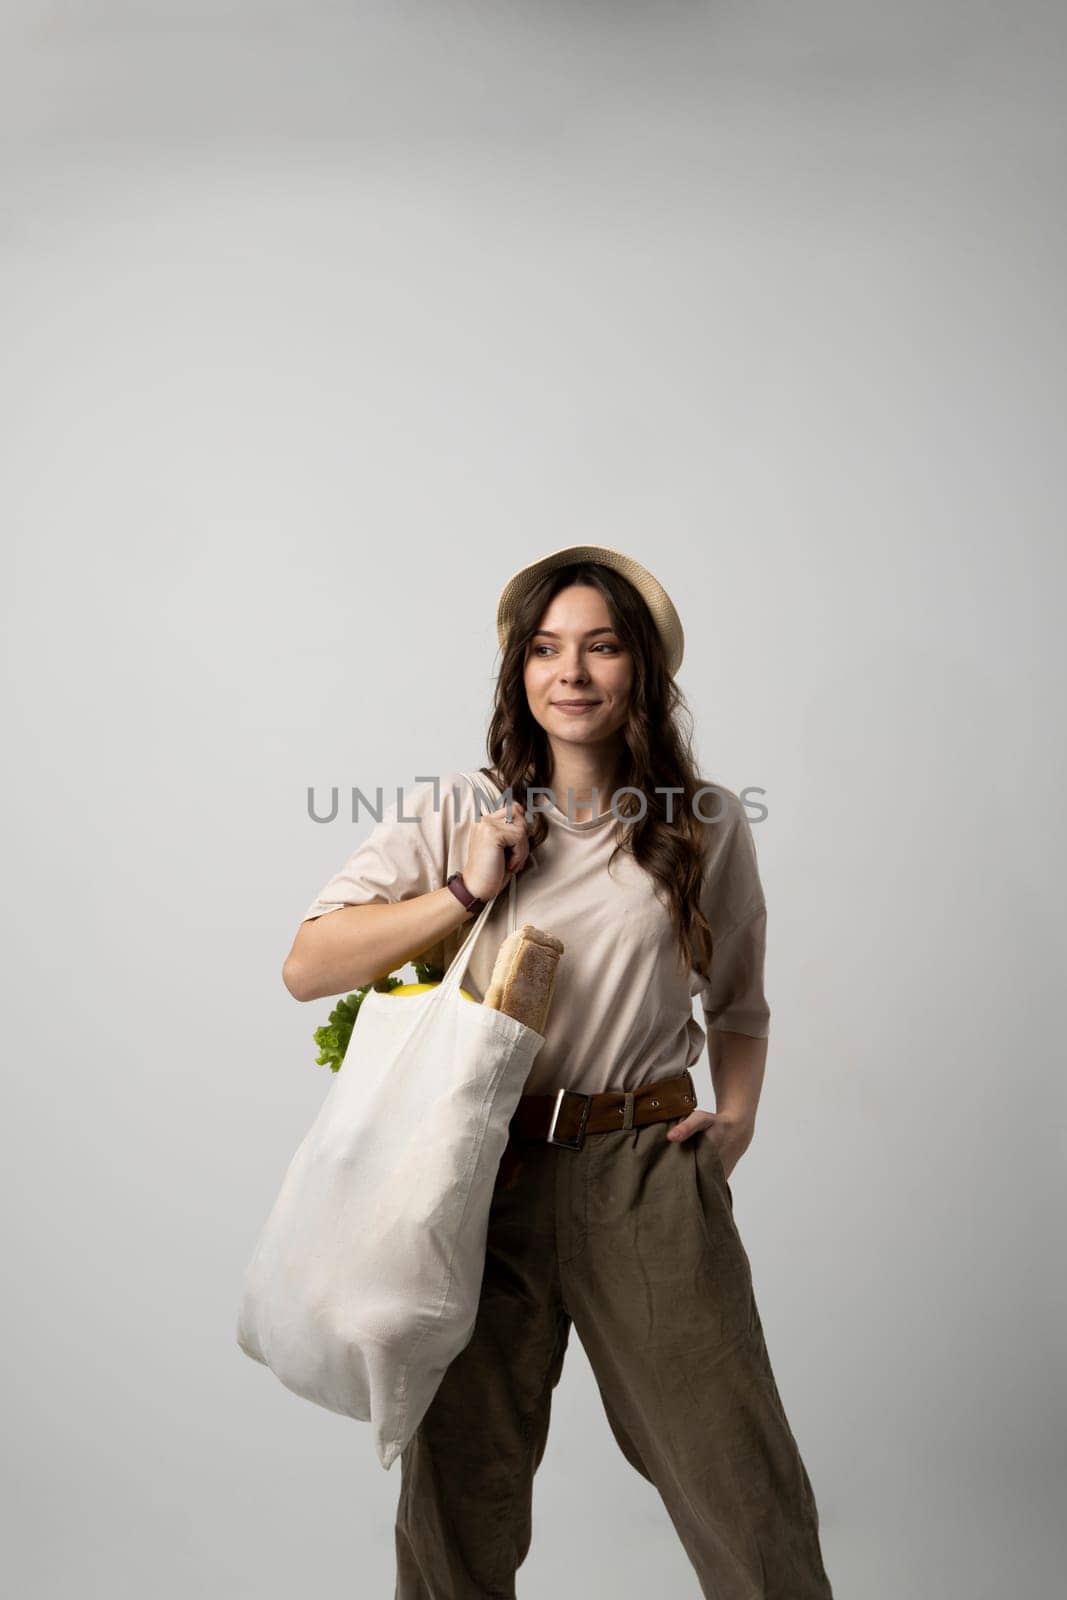 Zero waste concept. Young brunette woman holding mesh eco bag with organic fruits and vegetables. Using reusable crochet net bag for grocery shopping